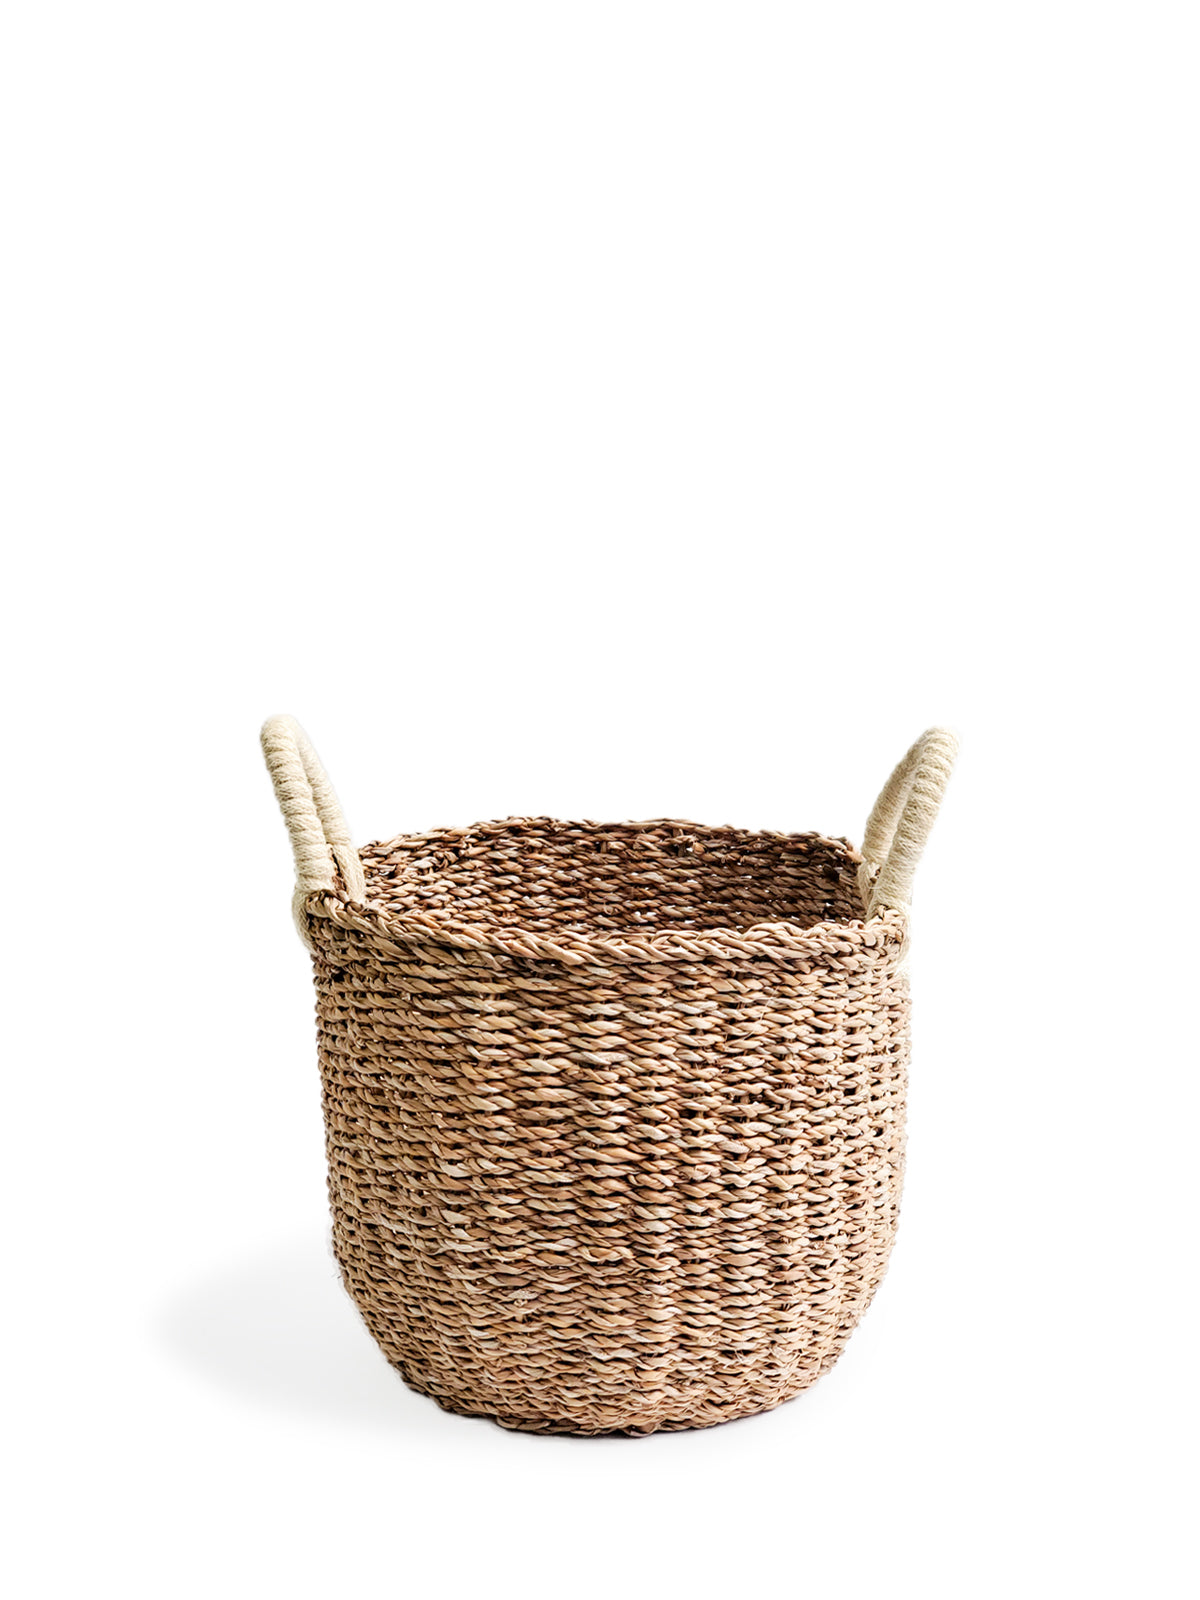 These beautiful seagrass baskets are the perfect solution to tidy up any space. Use them for storing toys, books, and plants.